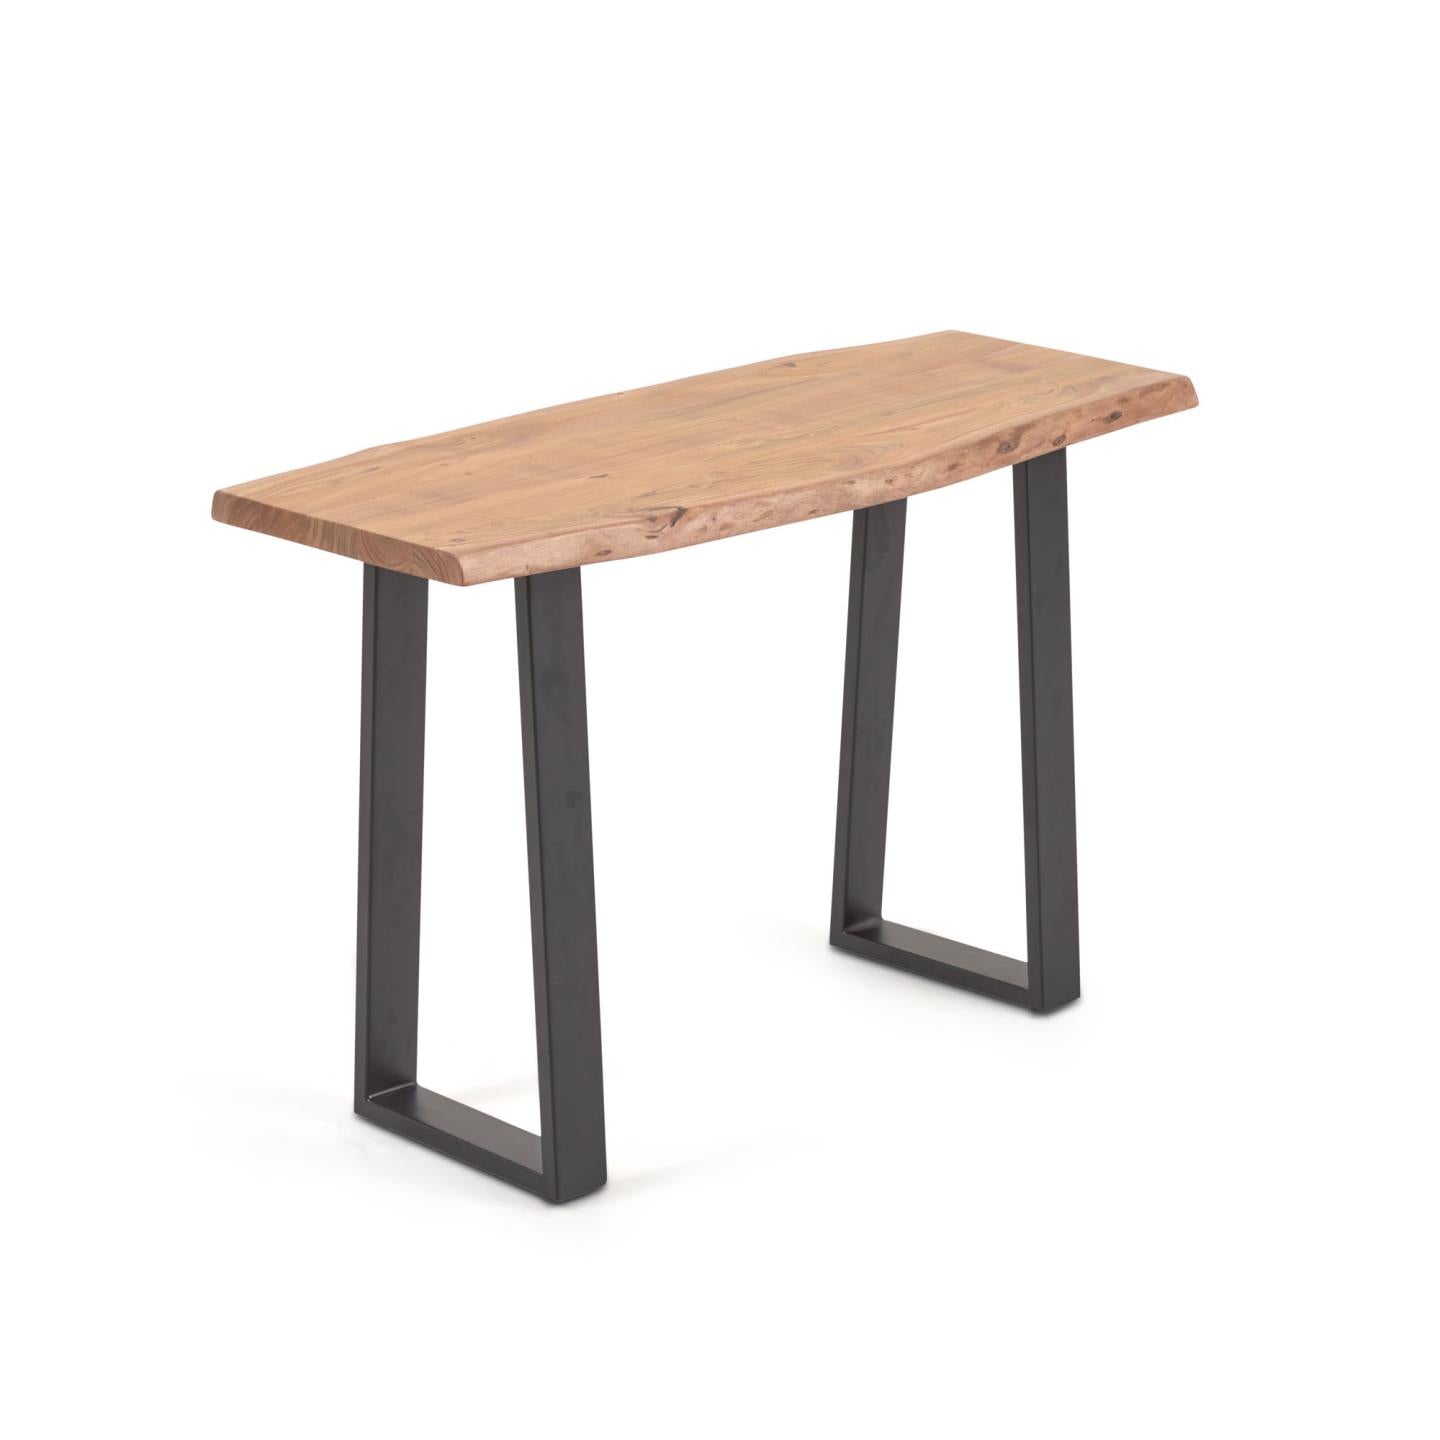 Alaia console table in solid acacia wood with natural finish, 115 x 40 cm